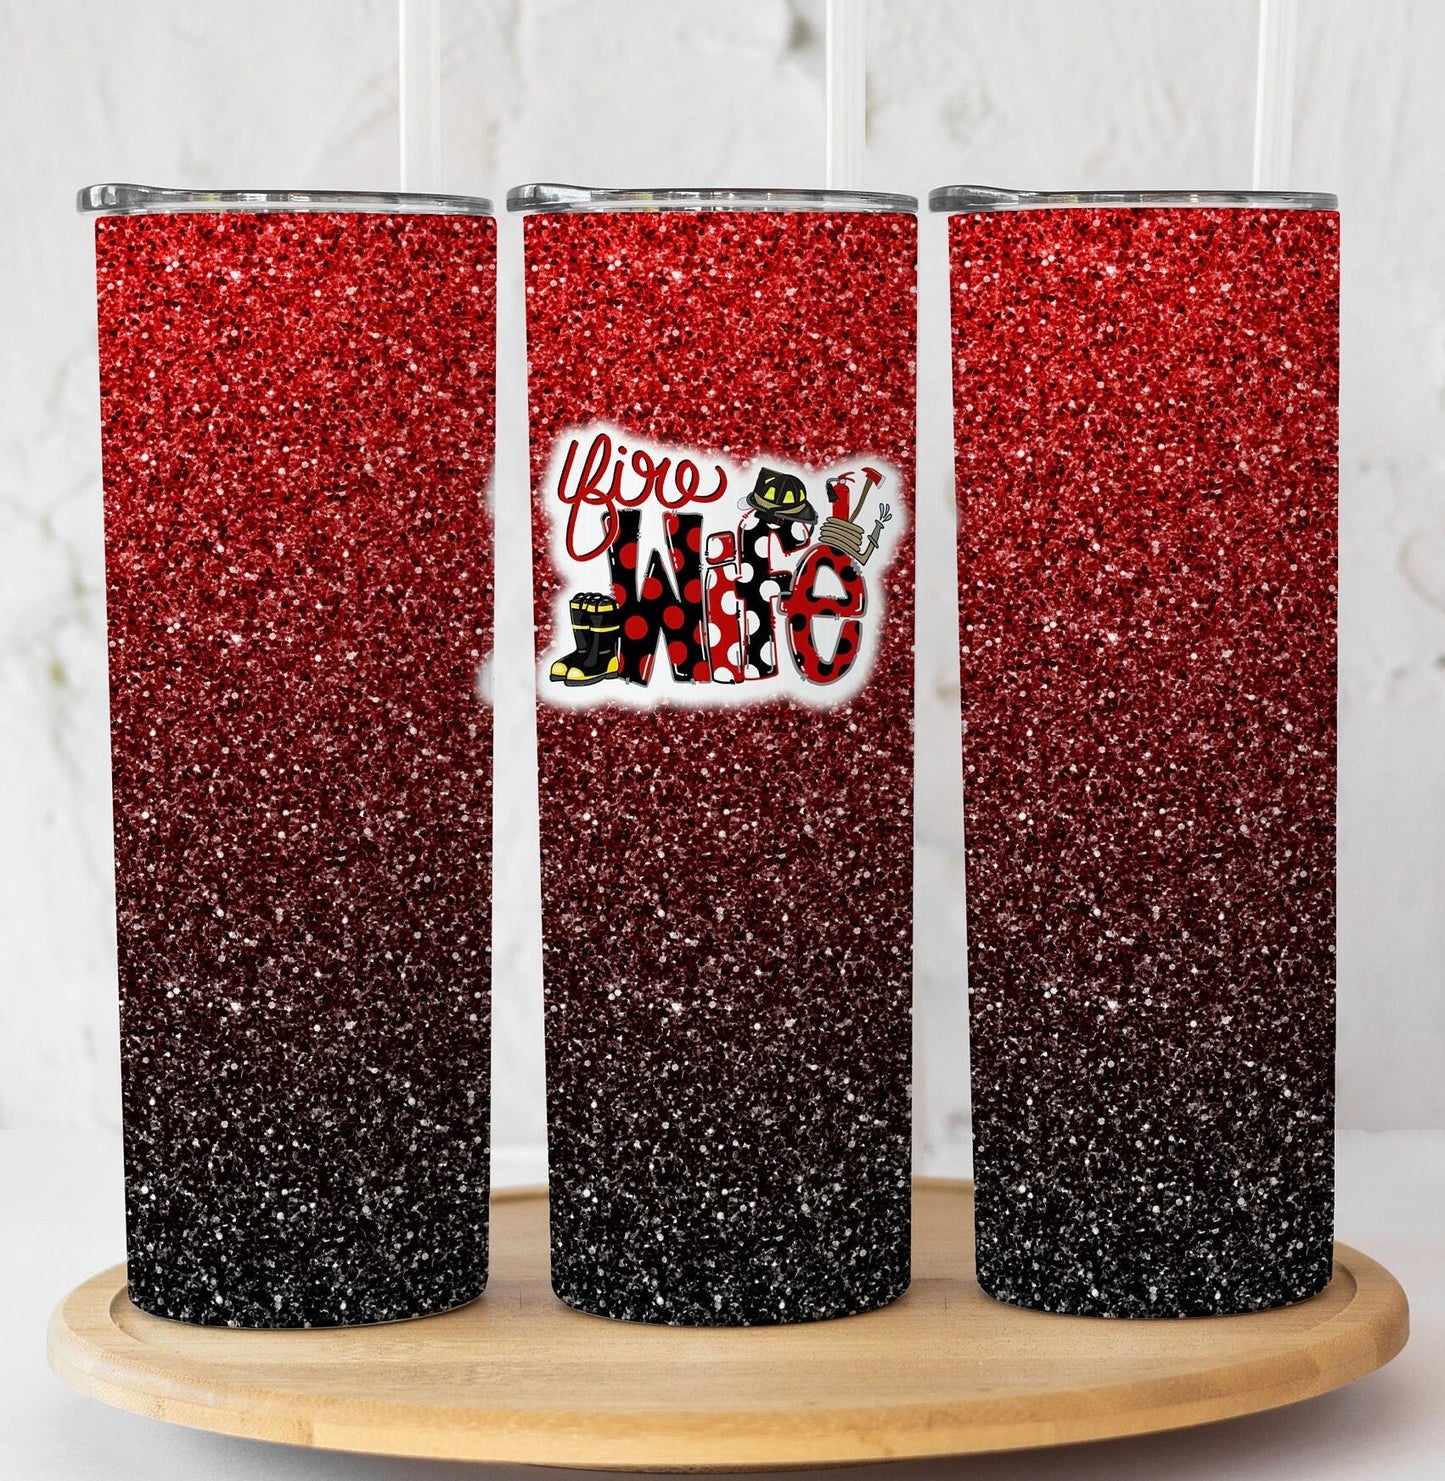 Fire Wife Tumbler, Firefighter Wife Gift, Thin Red Line Wife, Gifts for Her, Firefighter Gift, Fire Wife, Red Stripe